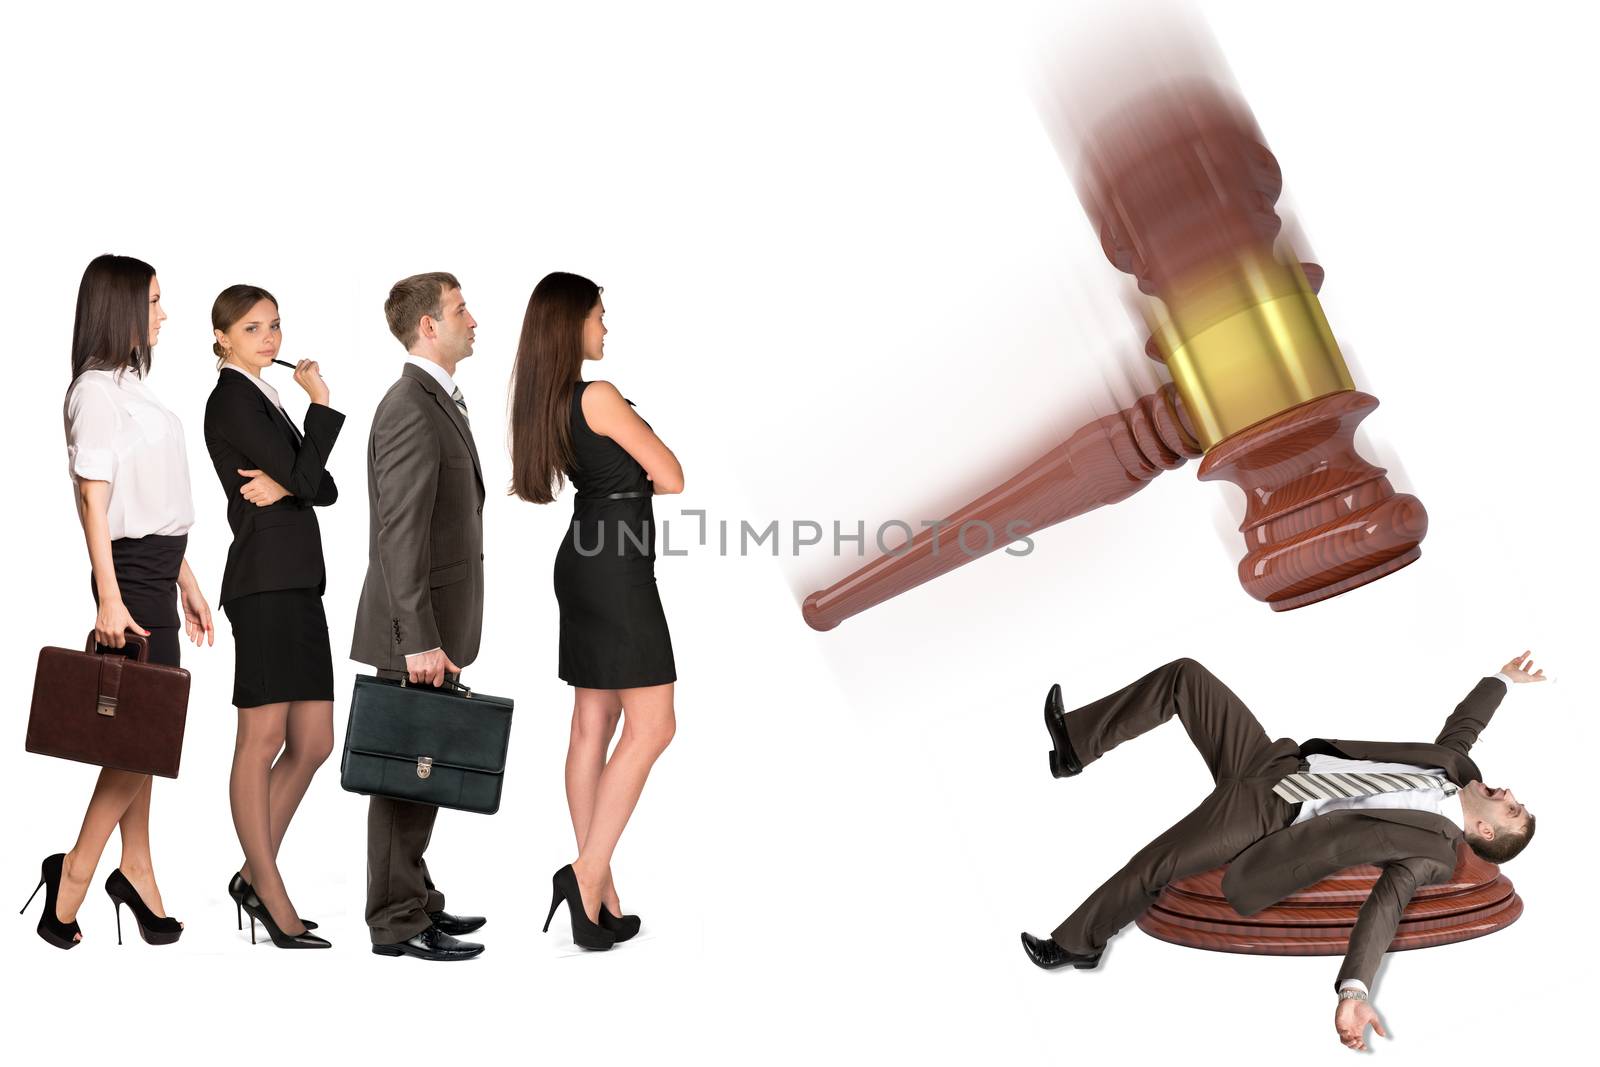 Inscribed gavel hitting scared businessman and crowd of waiting people, isolated on white background. Justice concept